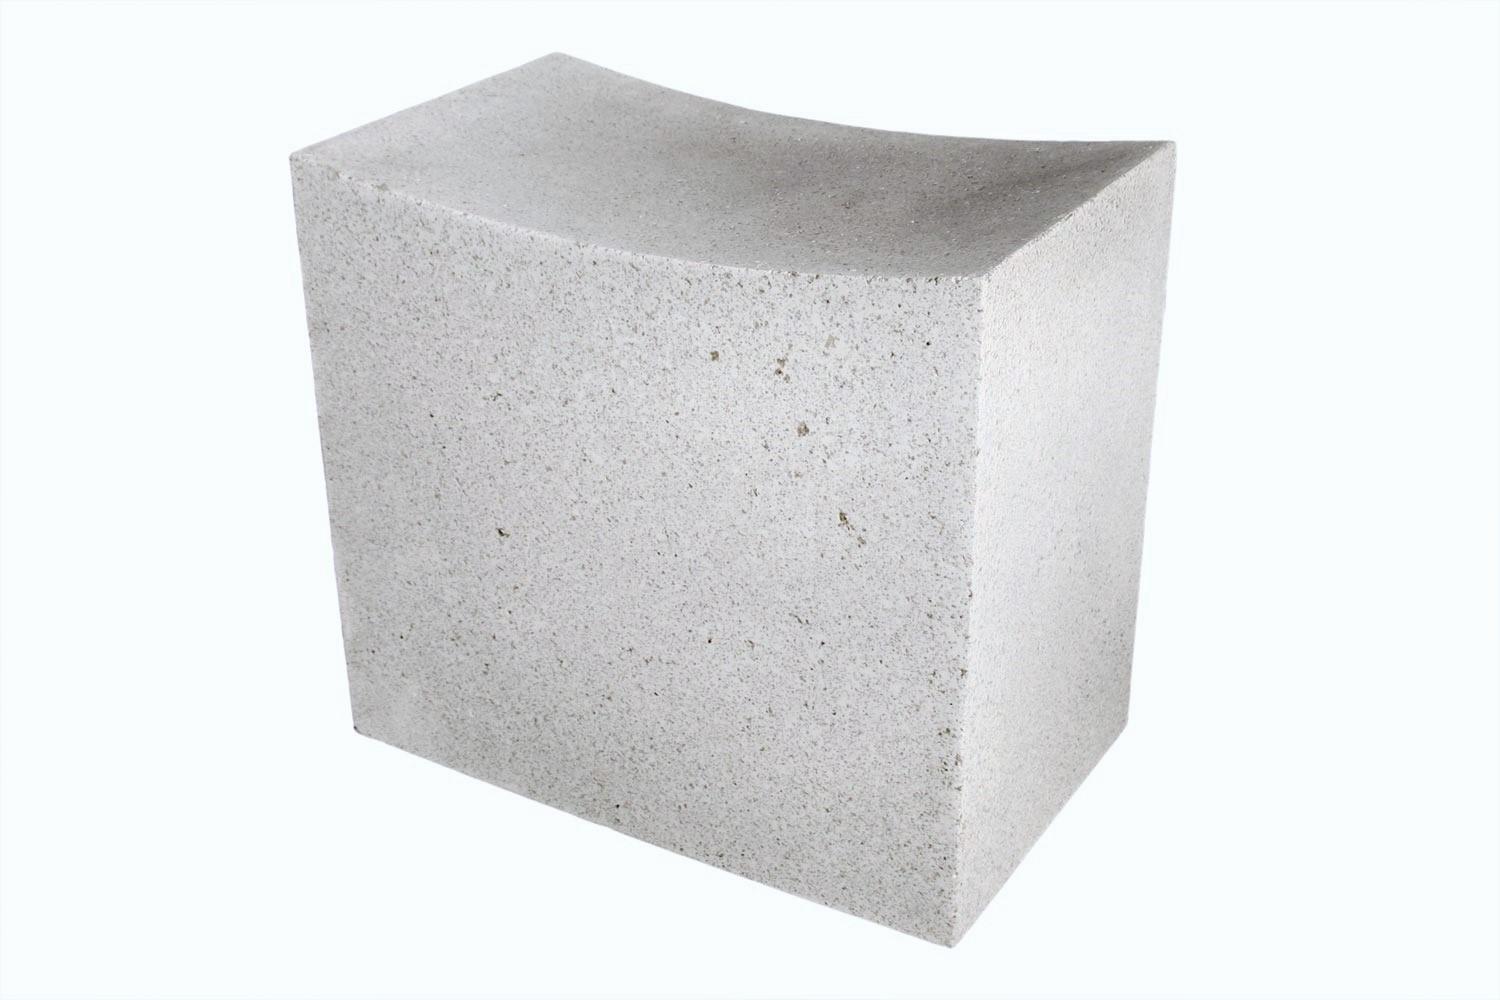 Brutalist sensibility with a soothing, gentle welcome.

Dimensions: Width 20 in. (51 cm), depth 12 in. (30 cm), height 18 in. (46 cm), seat height of 18 in. (46 cm). Weight 20 lbs. (9 kg). No assembly required.

Finish color options:
White